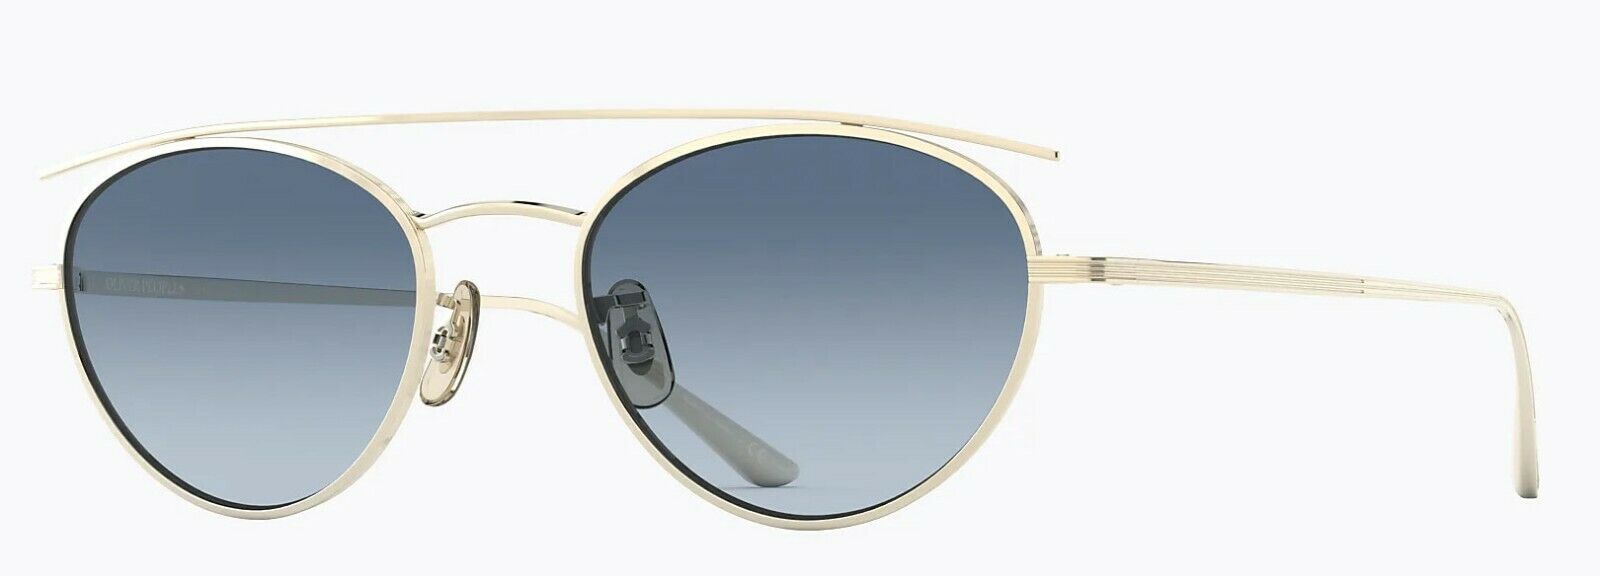 Oliver Peoples Sunglasses 1258ST 5035Q8 The Row Hightree Gold / Marine Gradient-827934432628-classypw.com-1